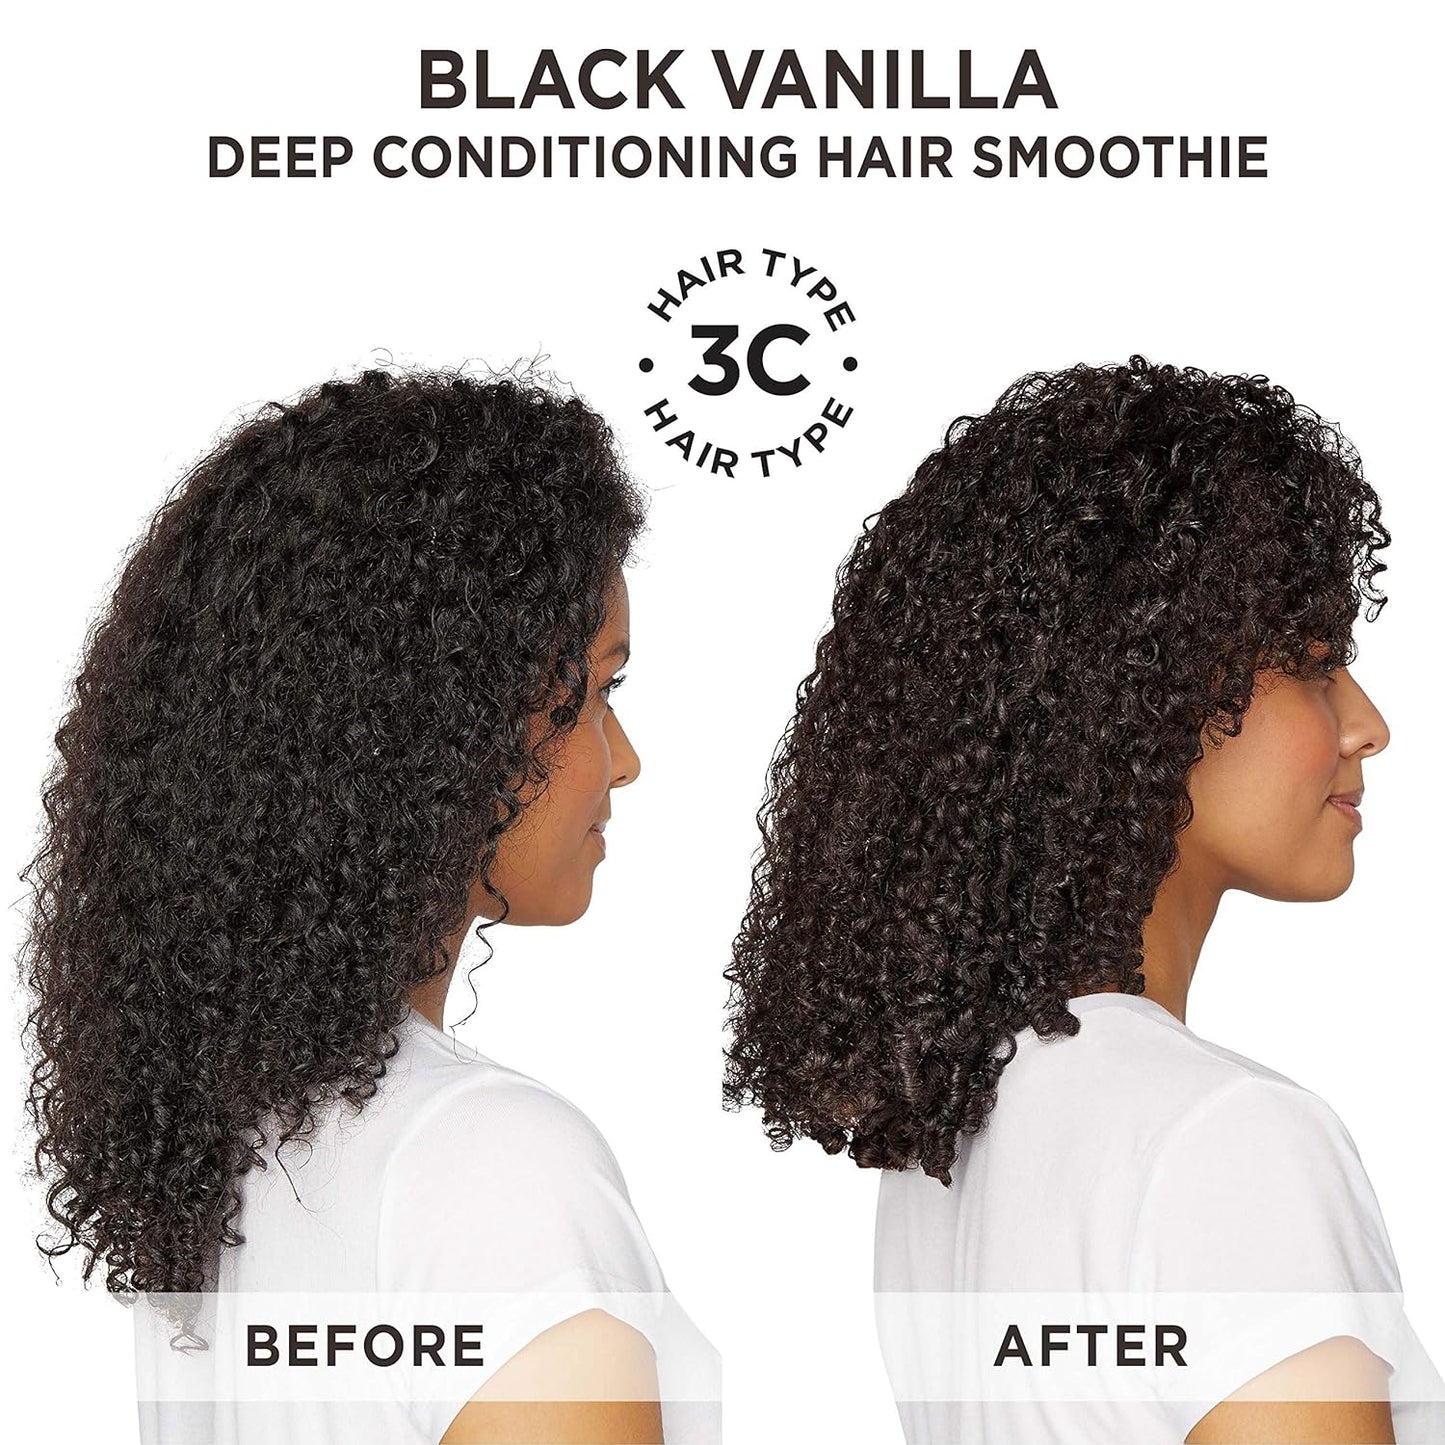 Carol’s Daughter Black Vanilla Curly Hair Sulfate Free Shampoo, Conditioner and Smoothie Set for Dry, Damaged Natural Hair, Moisturizing & Hydrating Hair Care Kit - with Shea Butter, Aloe & Rosemary